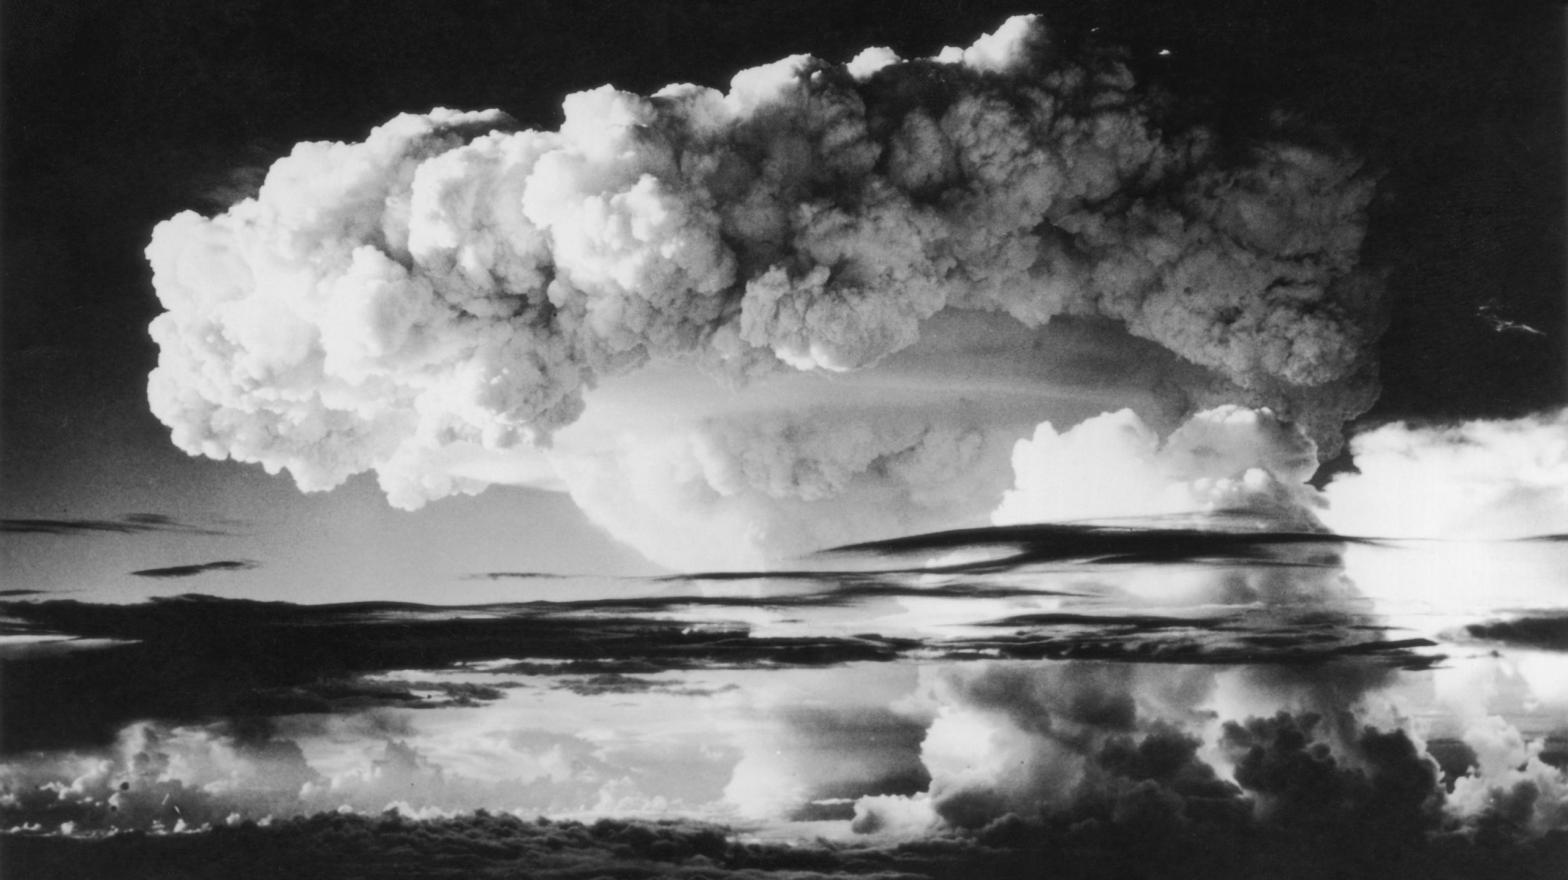 Hydrogen bomb testing in the Pacific yielded new elements. (Photo: Keystone/Getty Images, Getty Images)